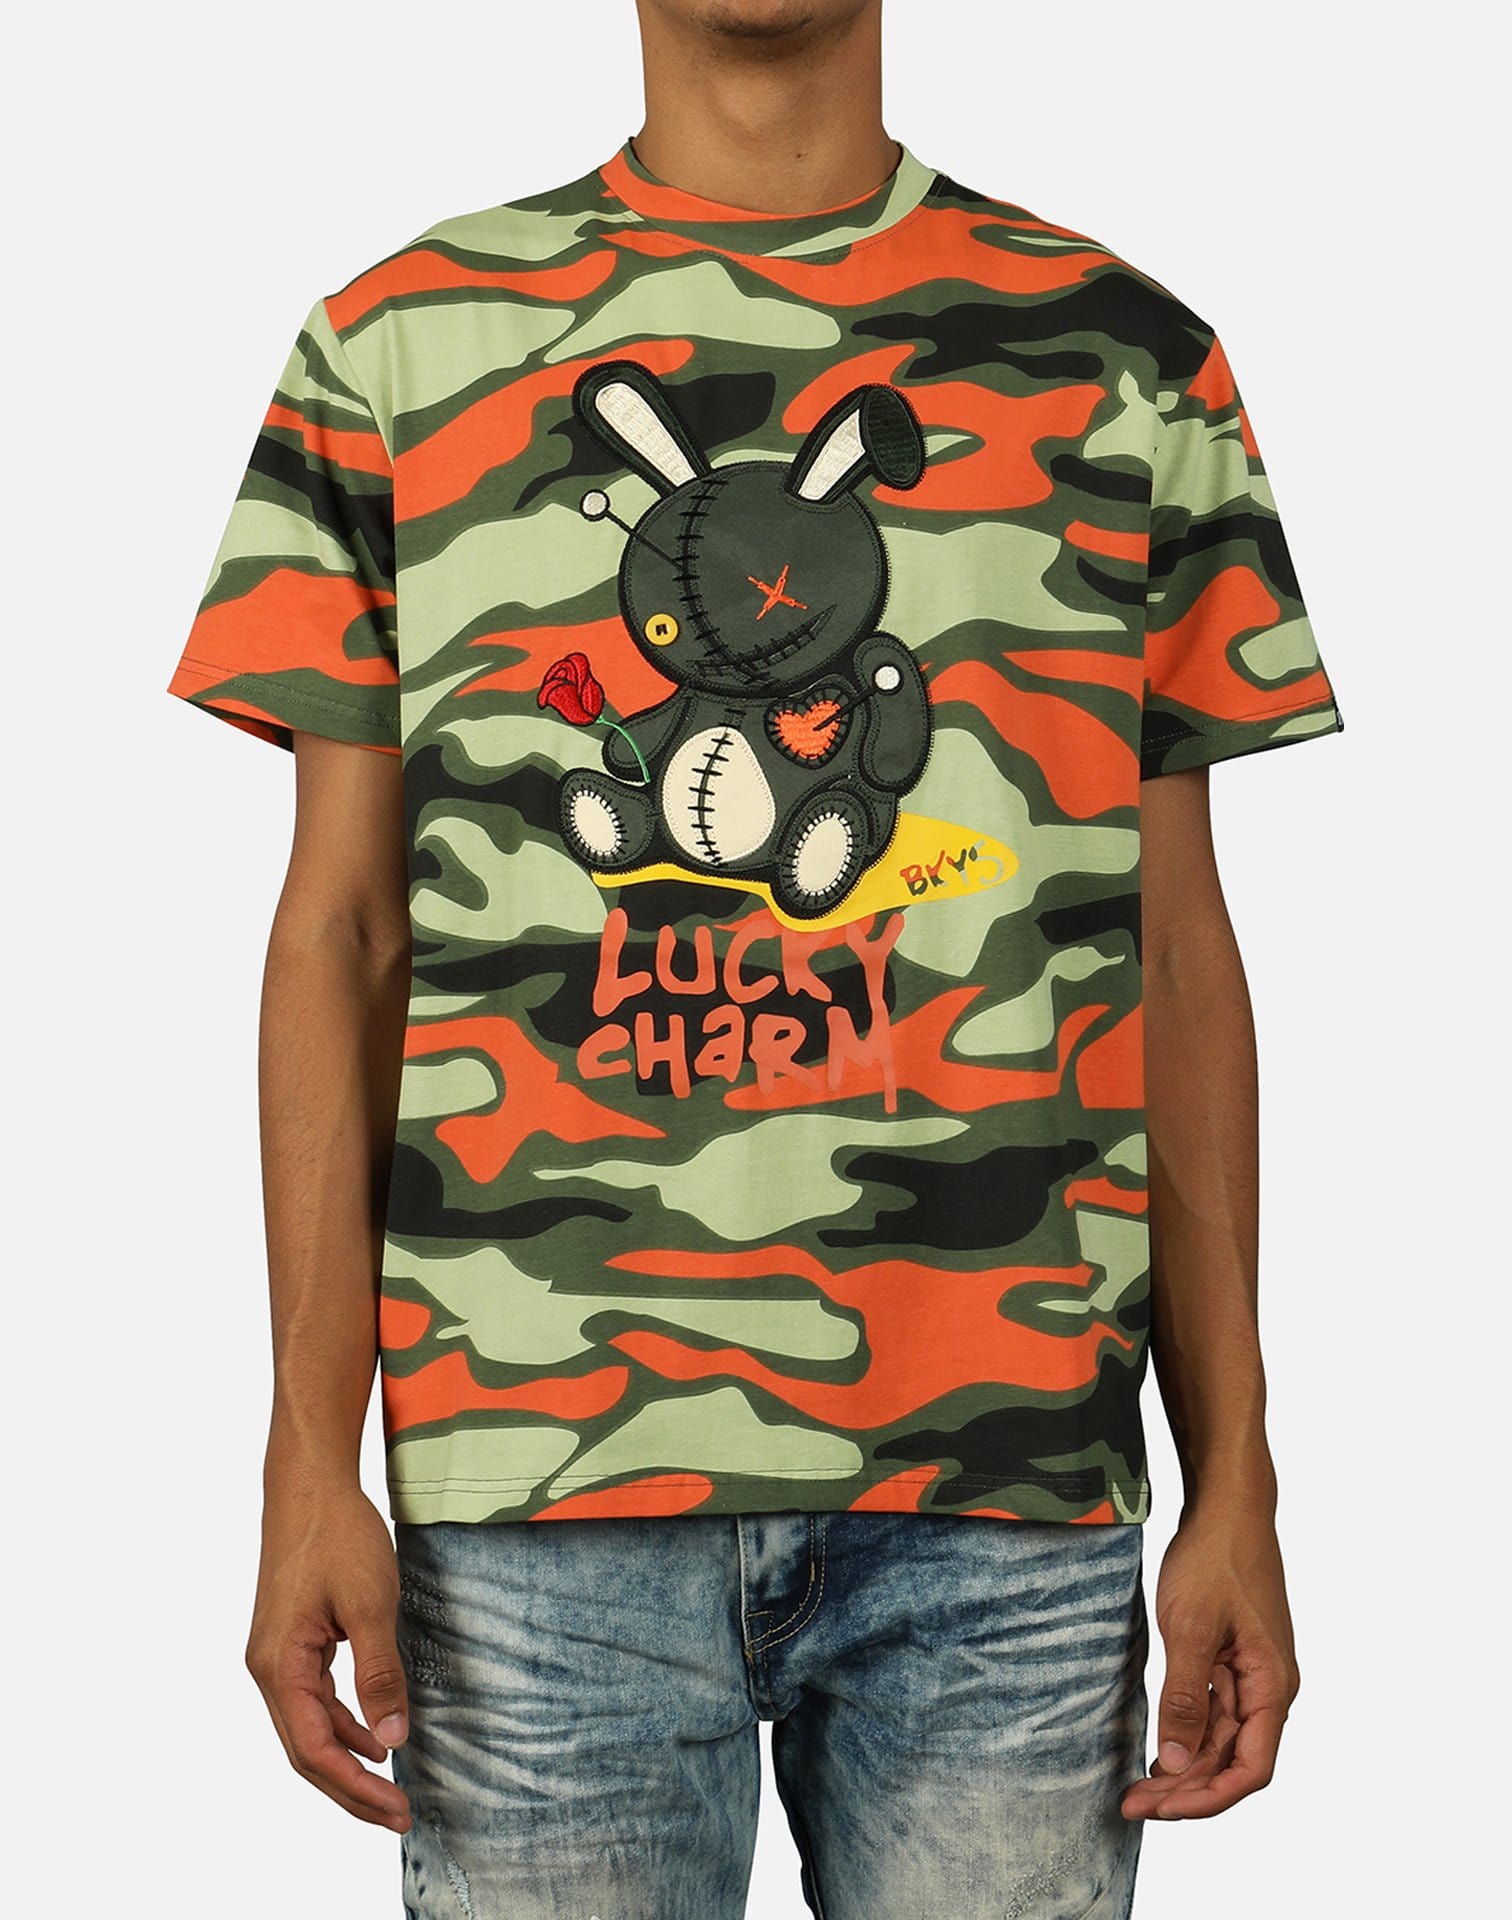 K and S Men's Lucky Charm Tee